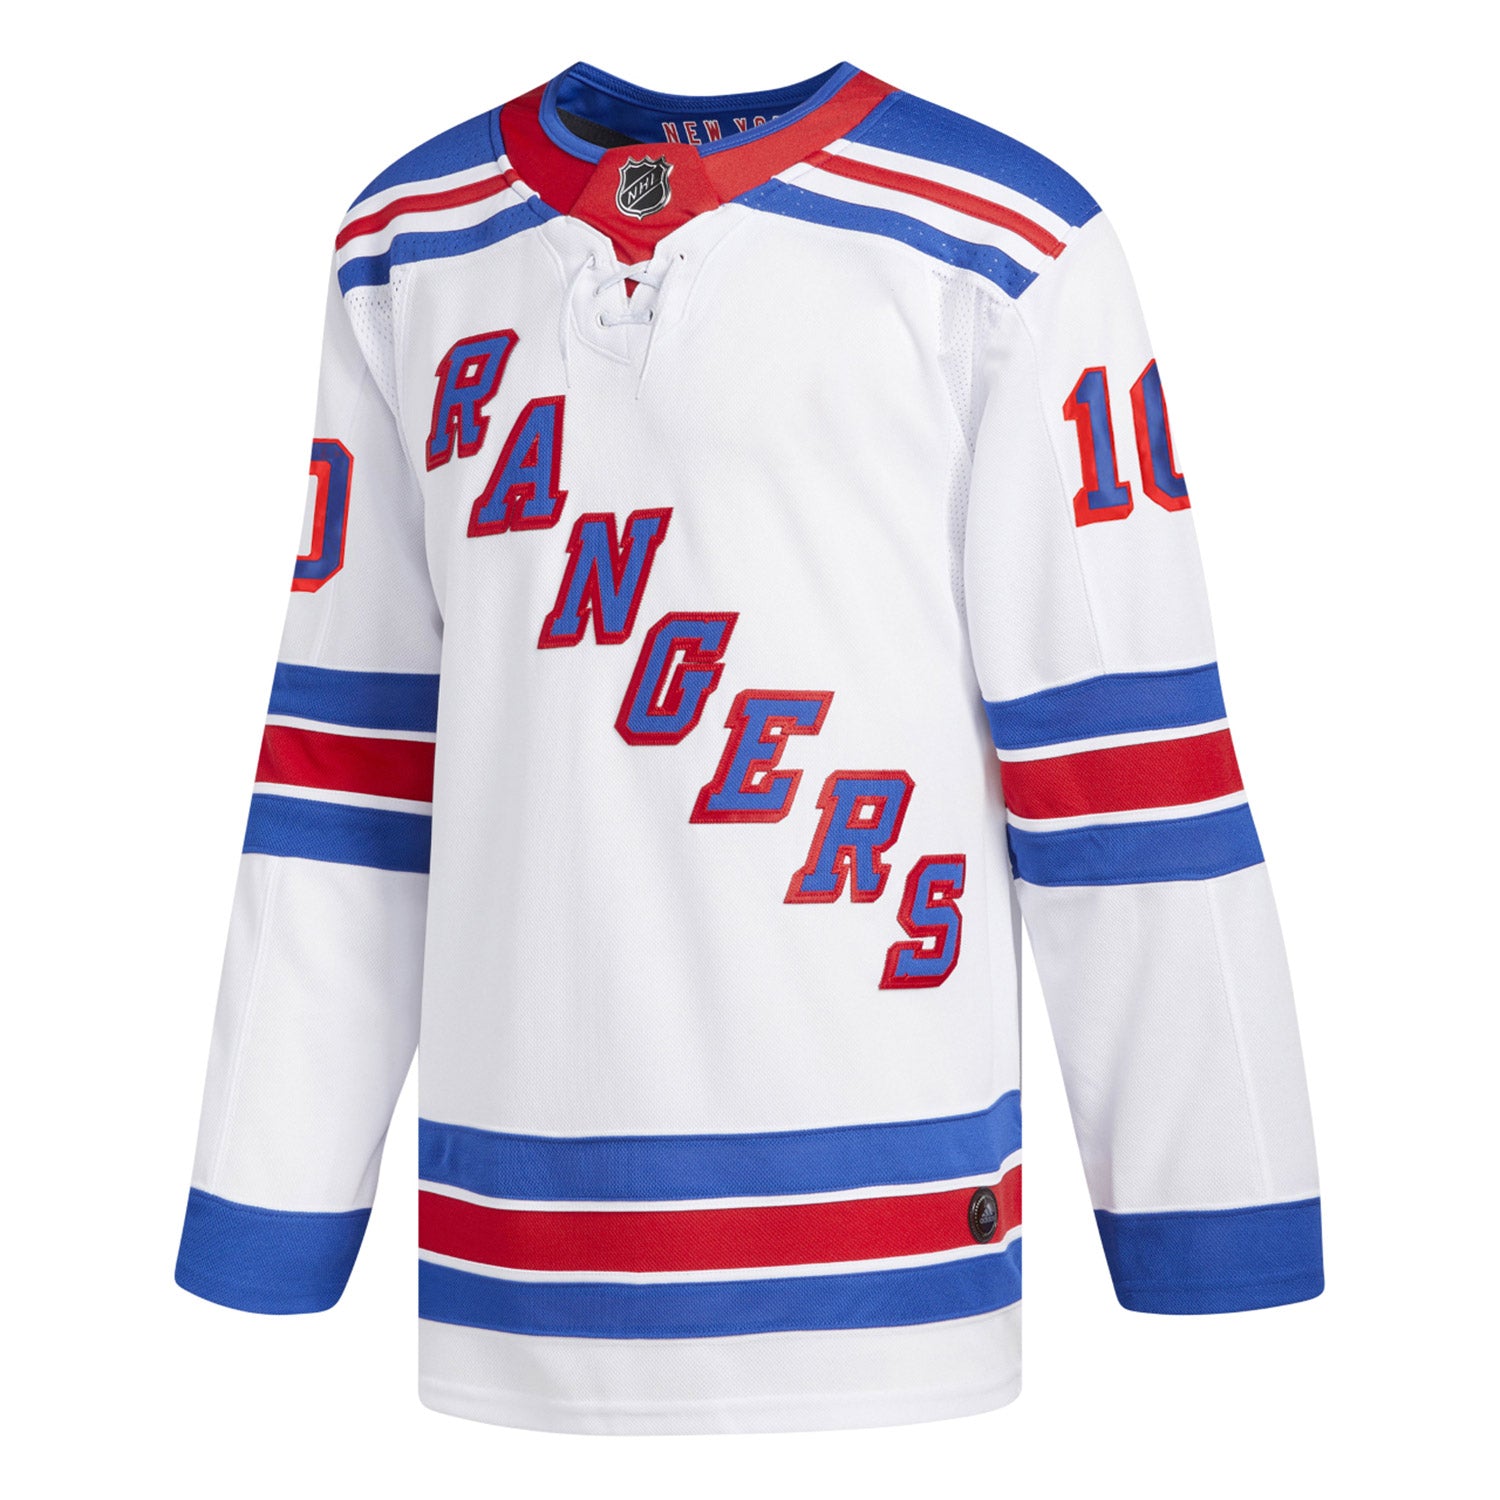 Detailed NHL Adidas Authentic Jersey Sizing Measurements !! 